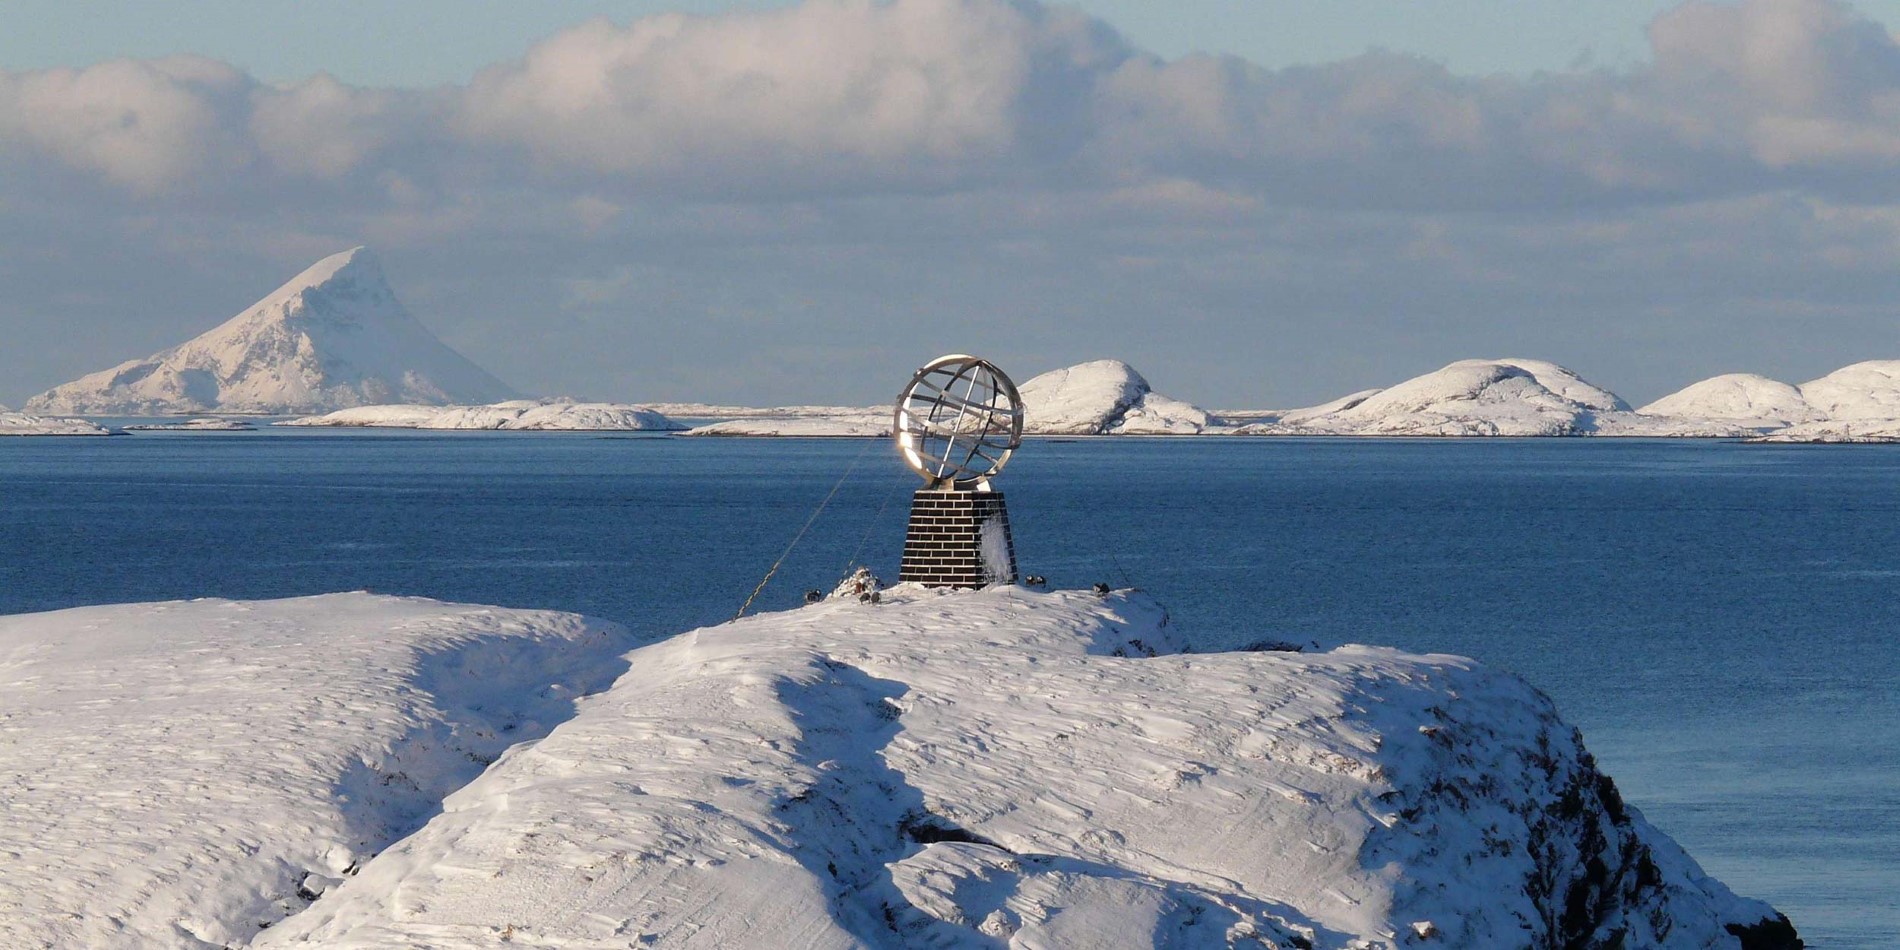 The Arctic Circle monument in winter